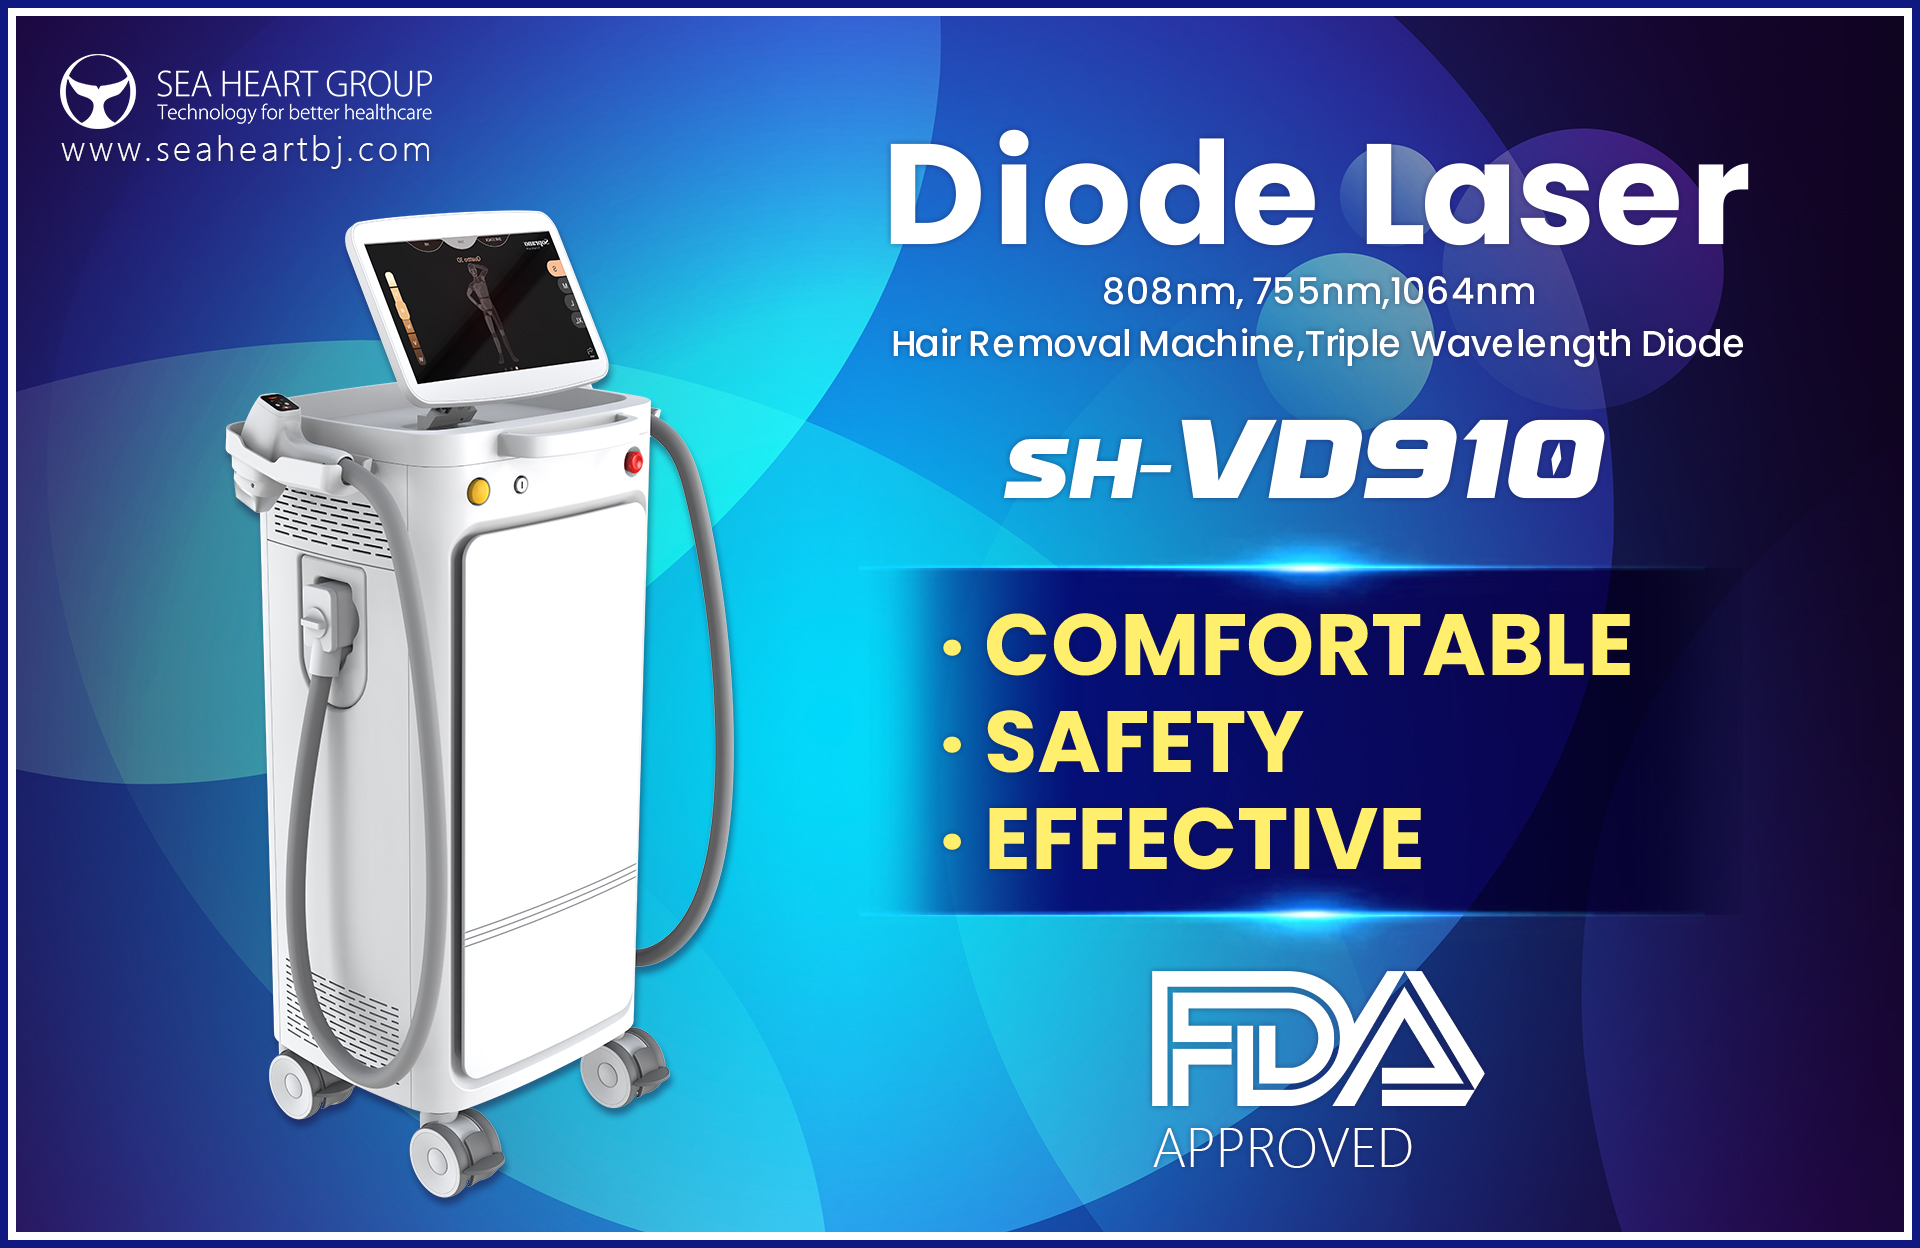 SH-VD910 Diode Laser Hair Removal Machine: A Breakthrough in Aesthetic Technology